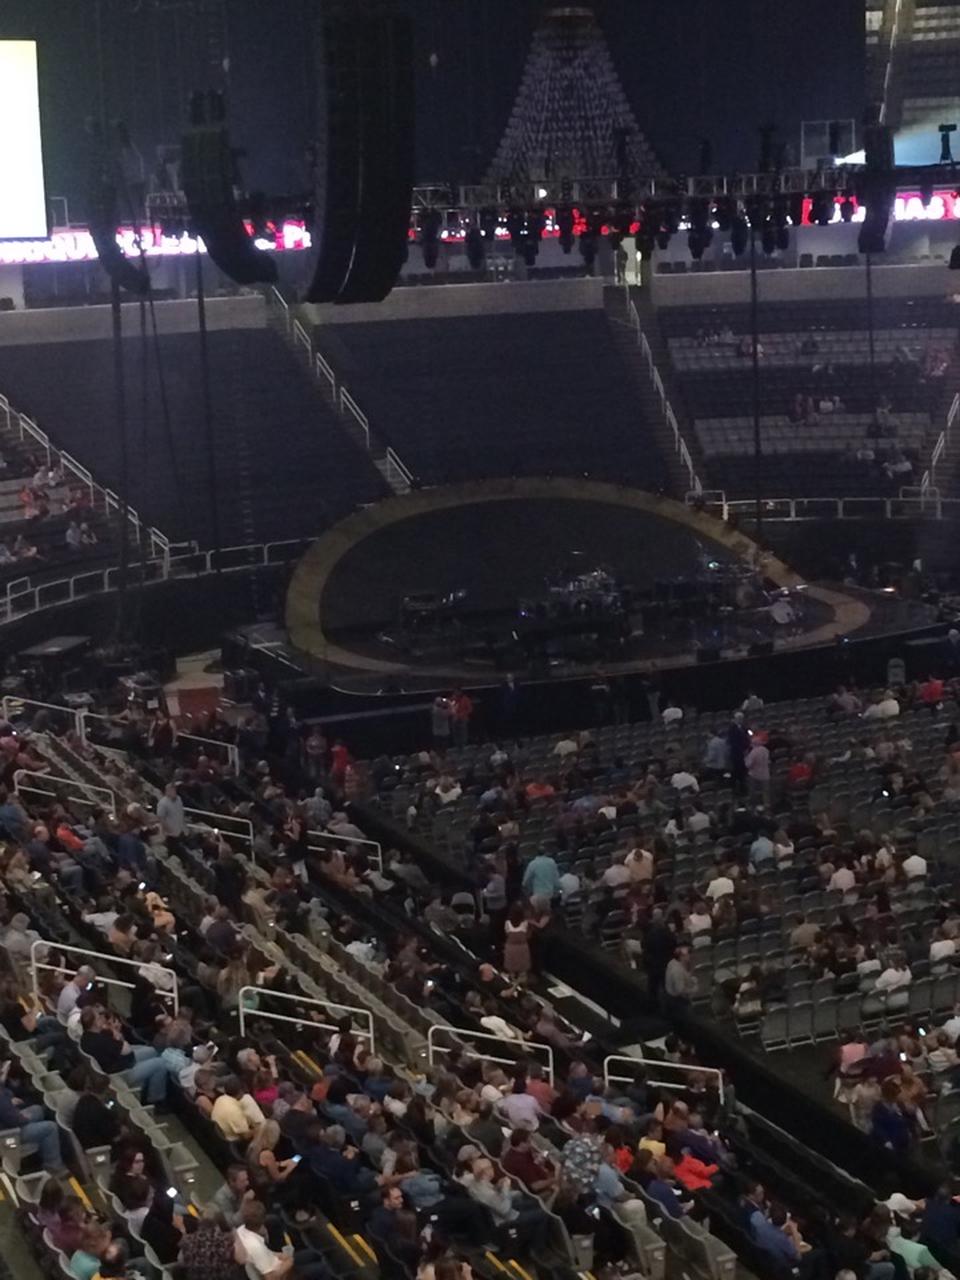 section 213, row 1 seat view  for concert - sap center